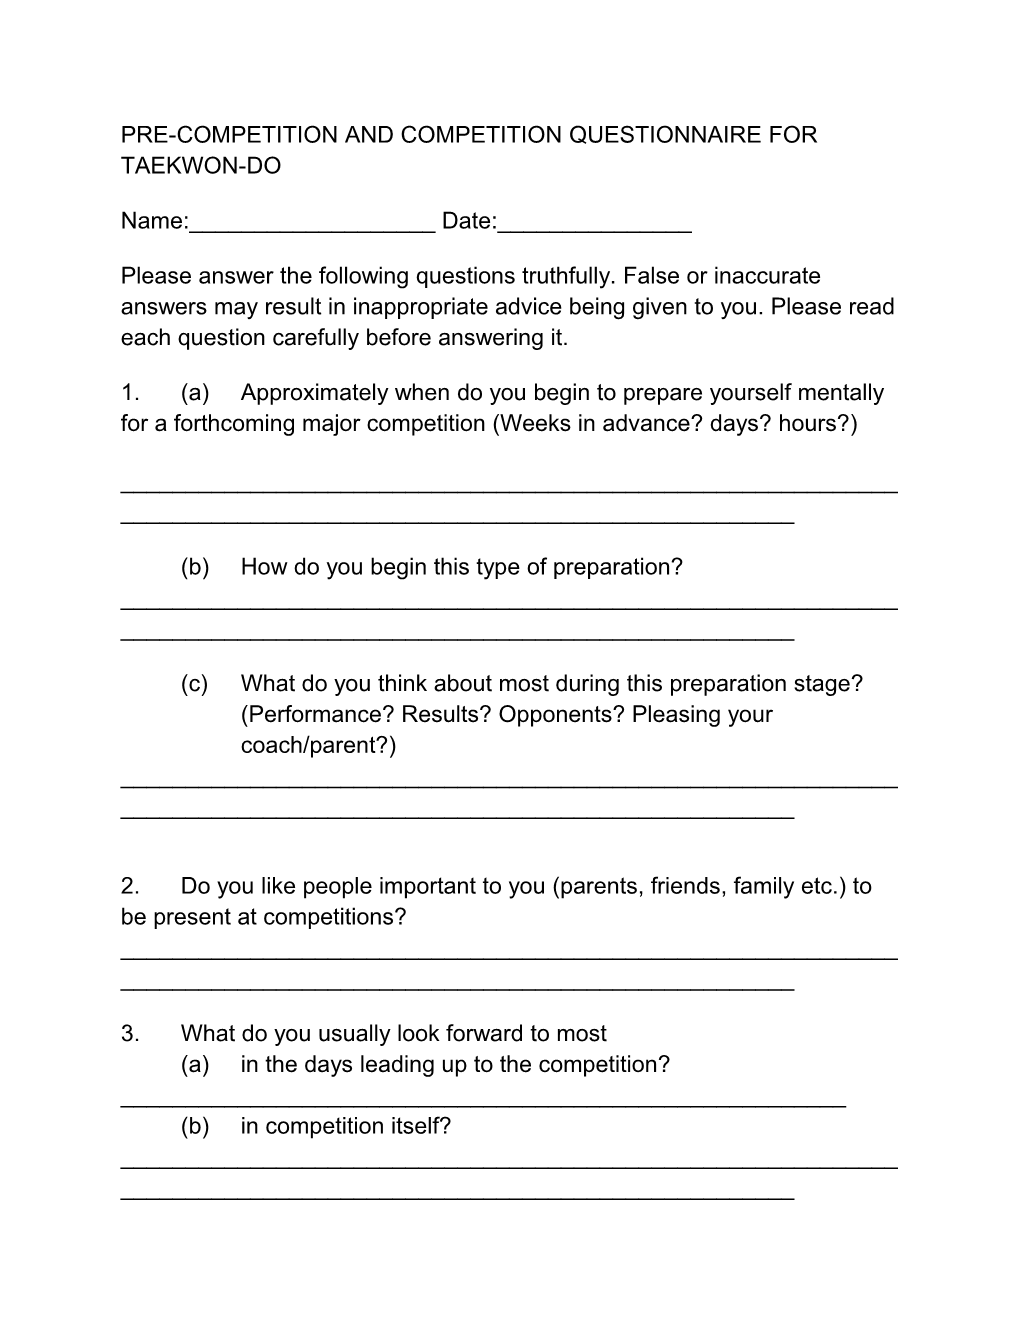 Pre Competition and Competition Questionnaire for Taekwon-Do